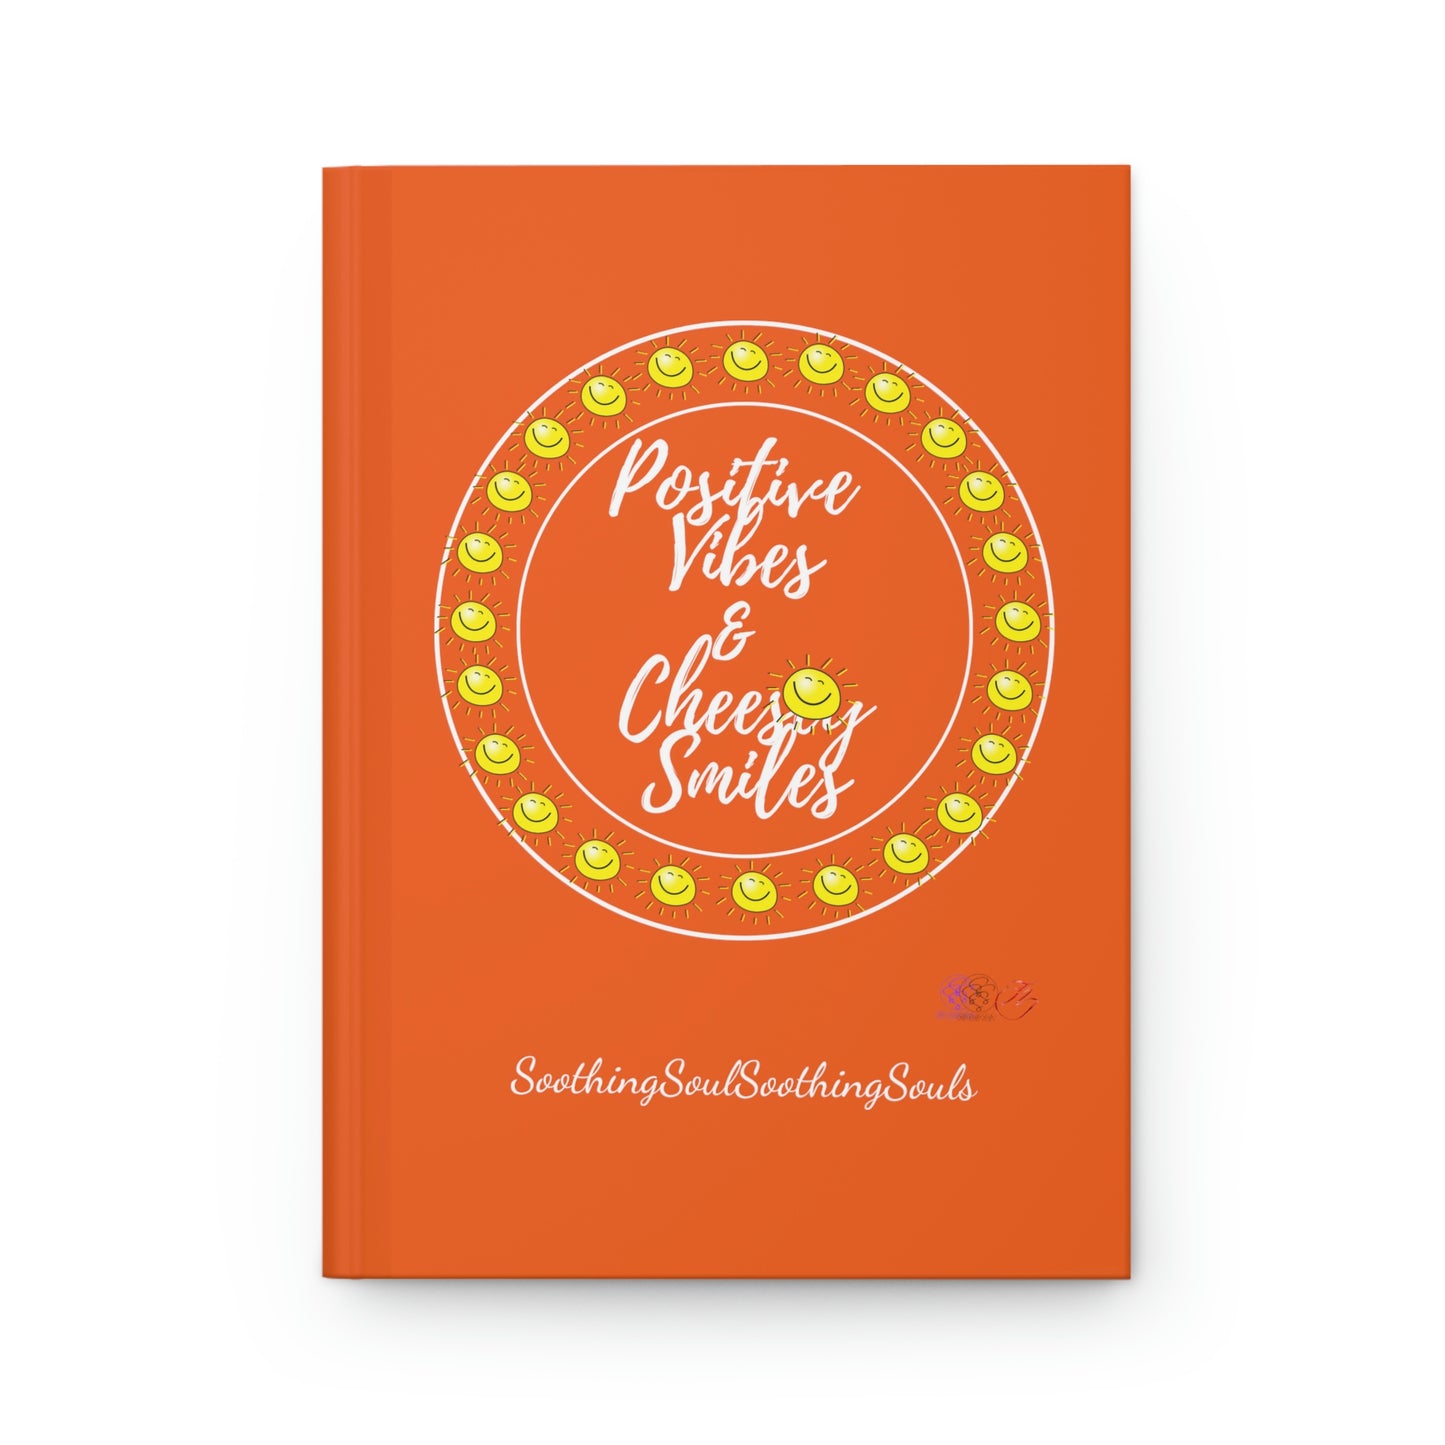 SSSS Positive Vibes & Cheesey Smiles Hardcover Journal Orange